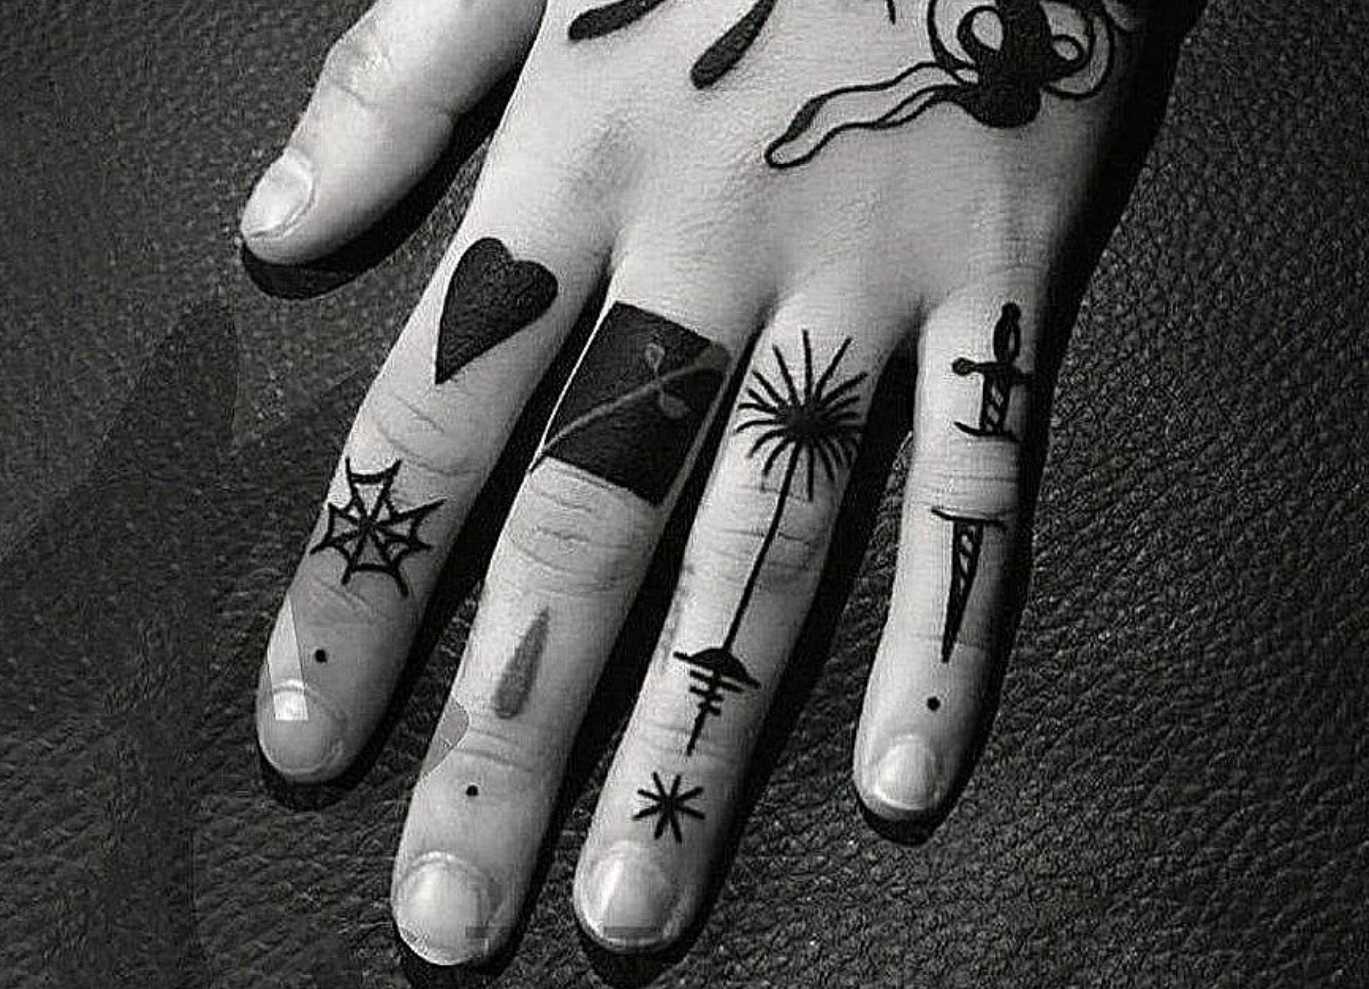 Tattoo ideas for fingers, Knuckle, Palm